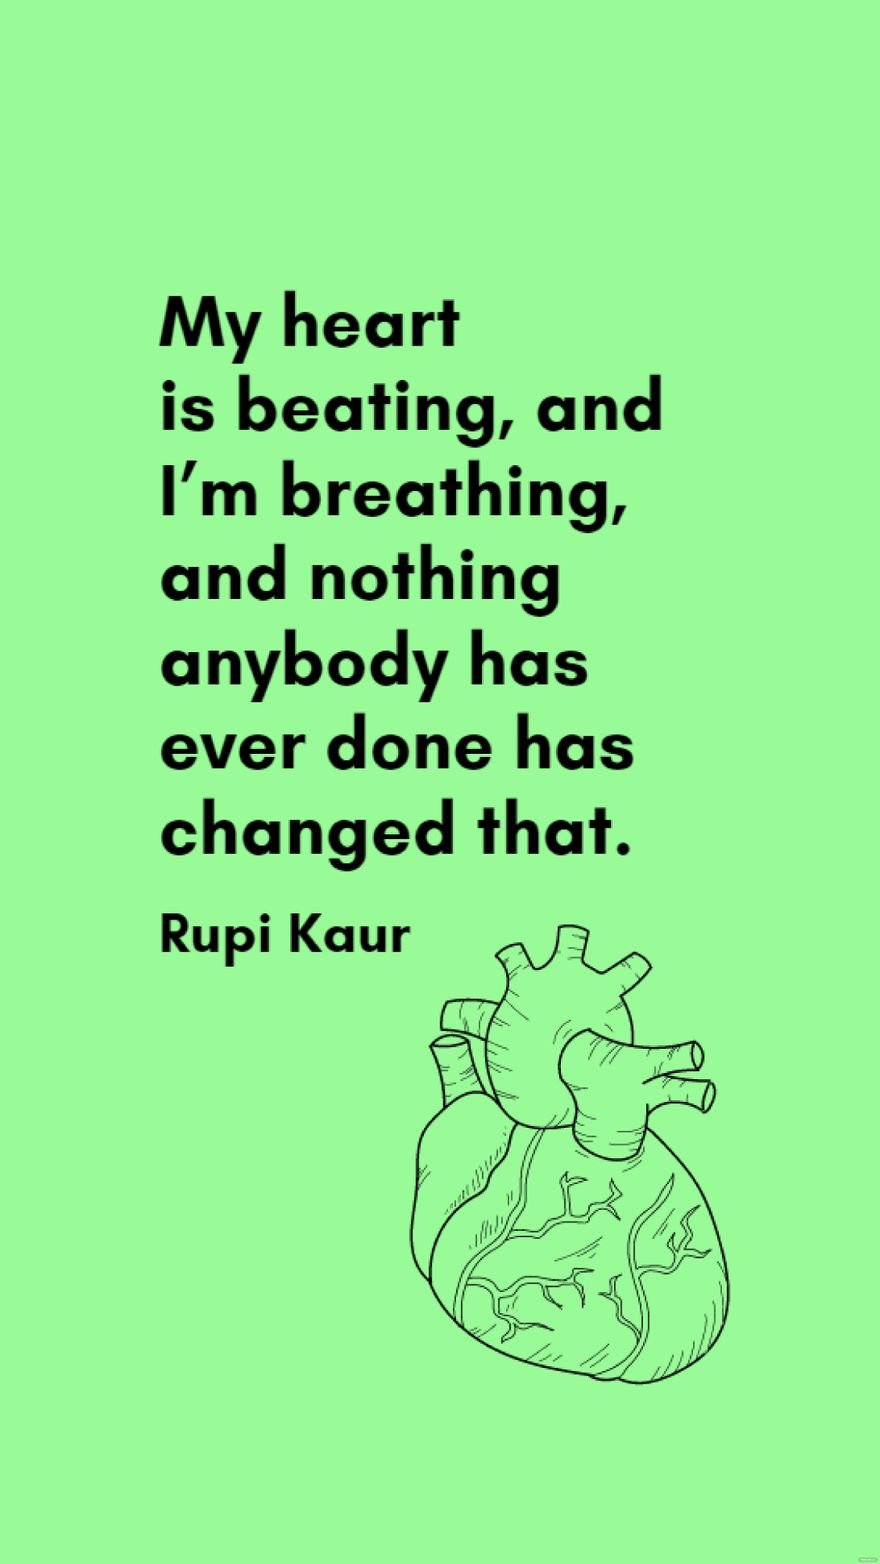 Free Rupi Kaur - My heart is beating, and I’m breathing, and nothing anybody has ever done has changed that.